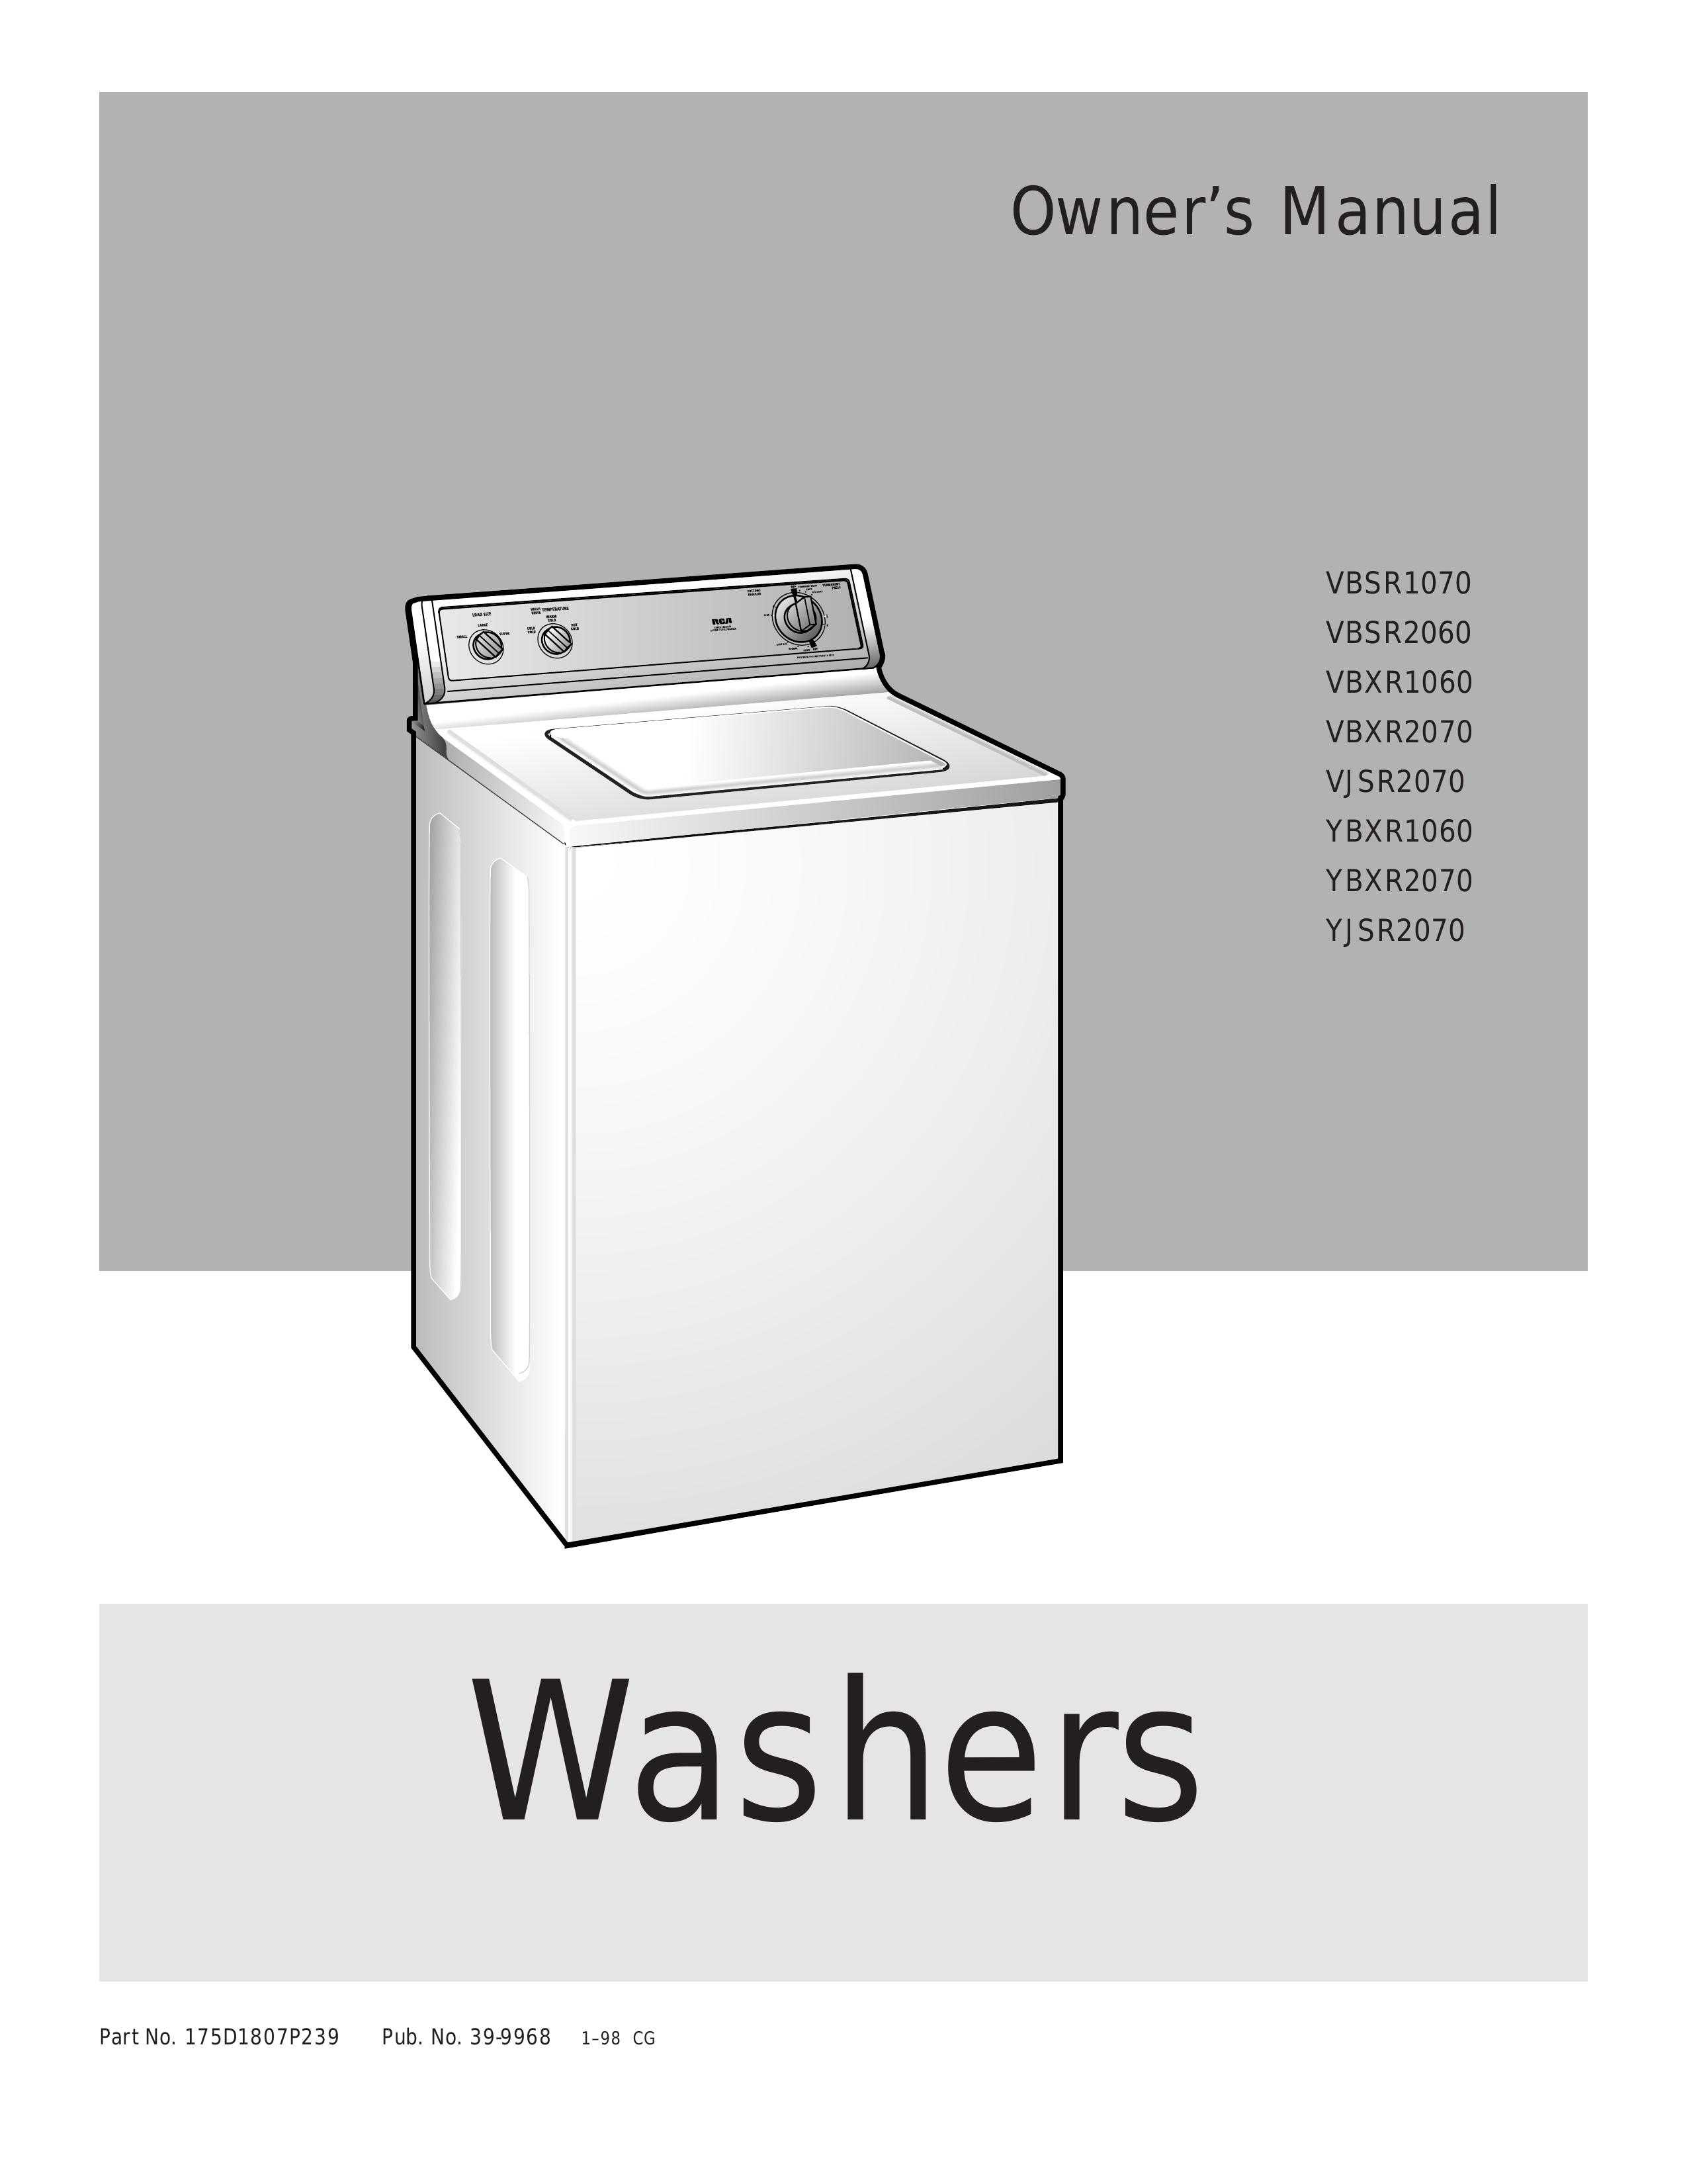 GE 175D1807P239 Washer User Manual